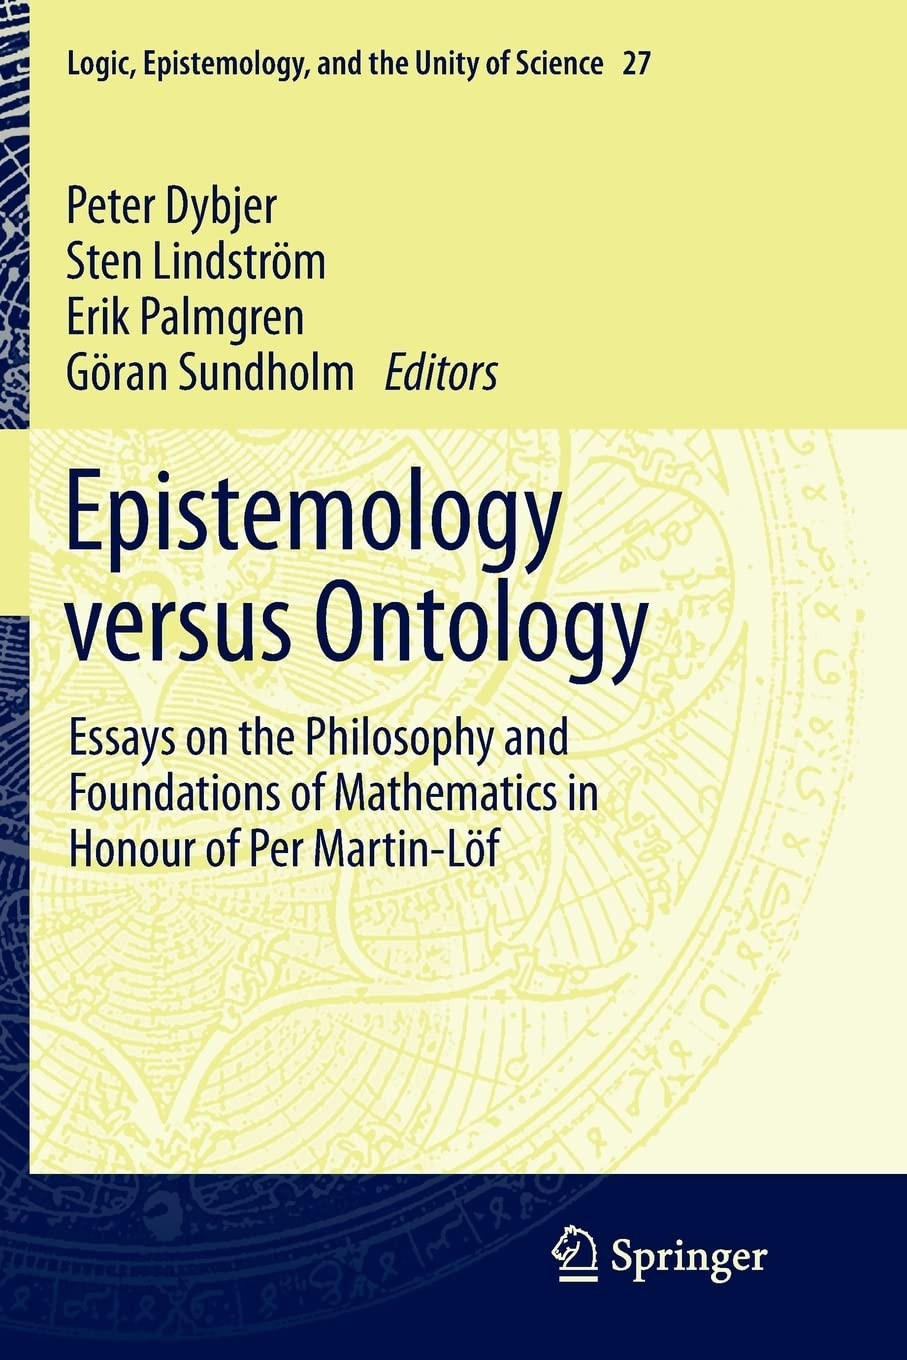 Epistemology Versus Ontology: Essays on the Philosophy and Foundations of Mathematics in Honour of Per Martin-Löf